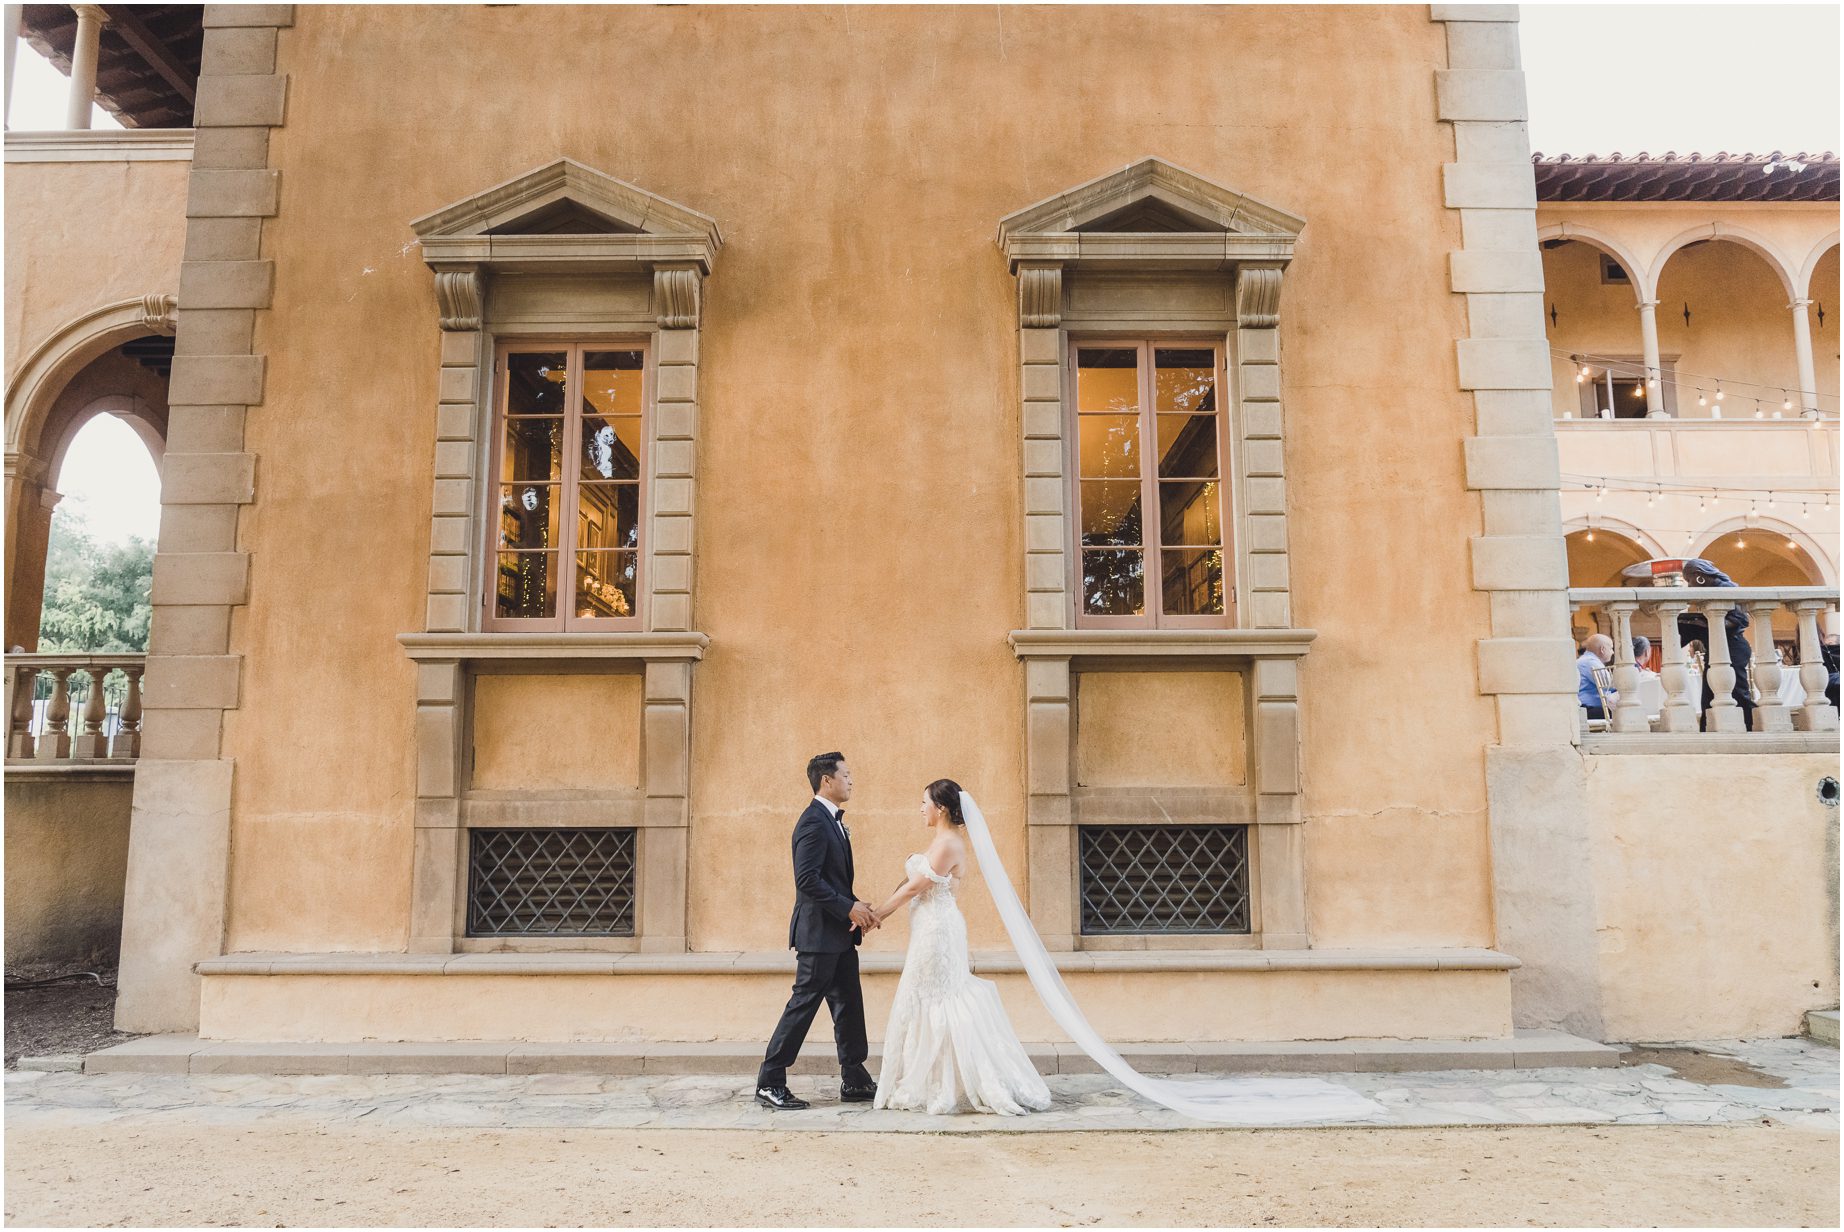 This is a dramatic shot of a bride and groom walking together near a building during their wedding at villa del sol d'Oro